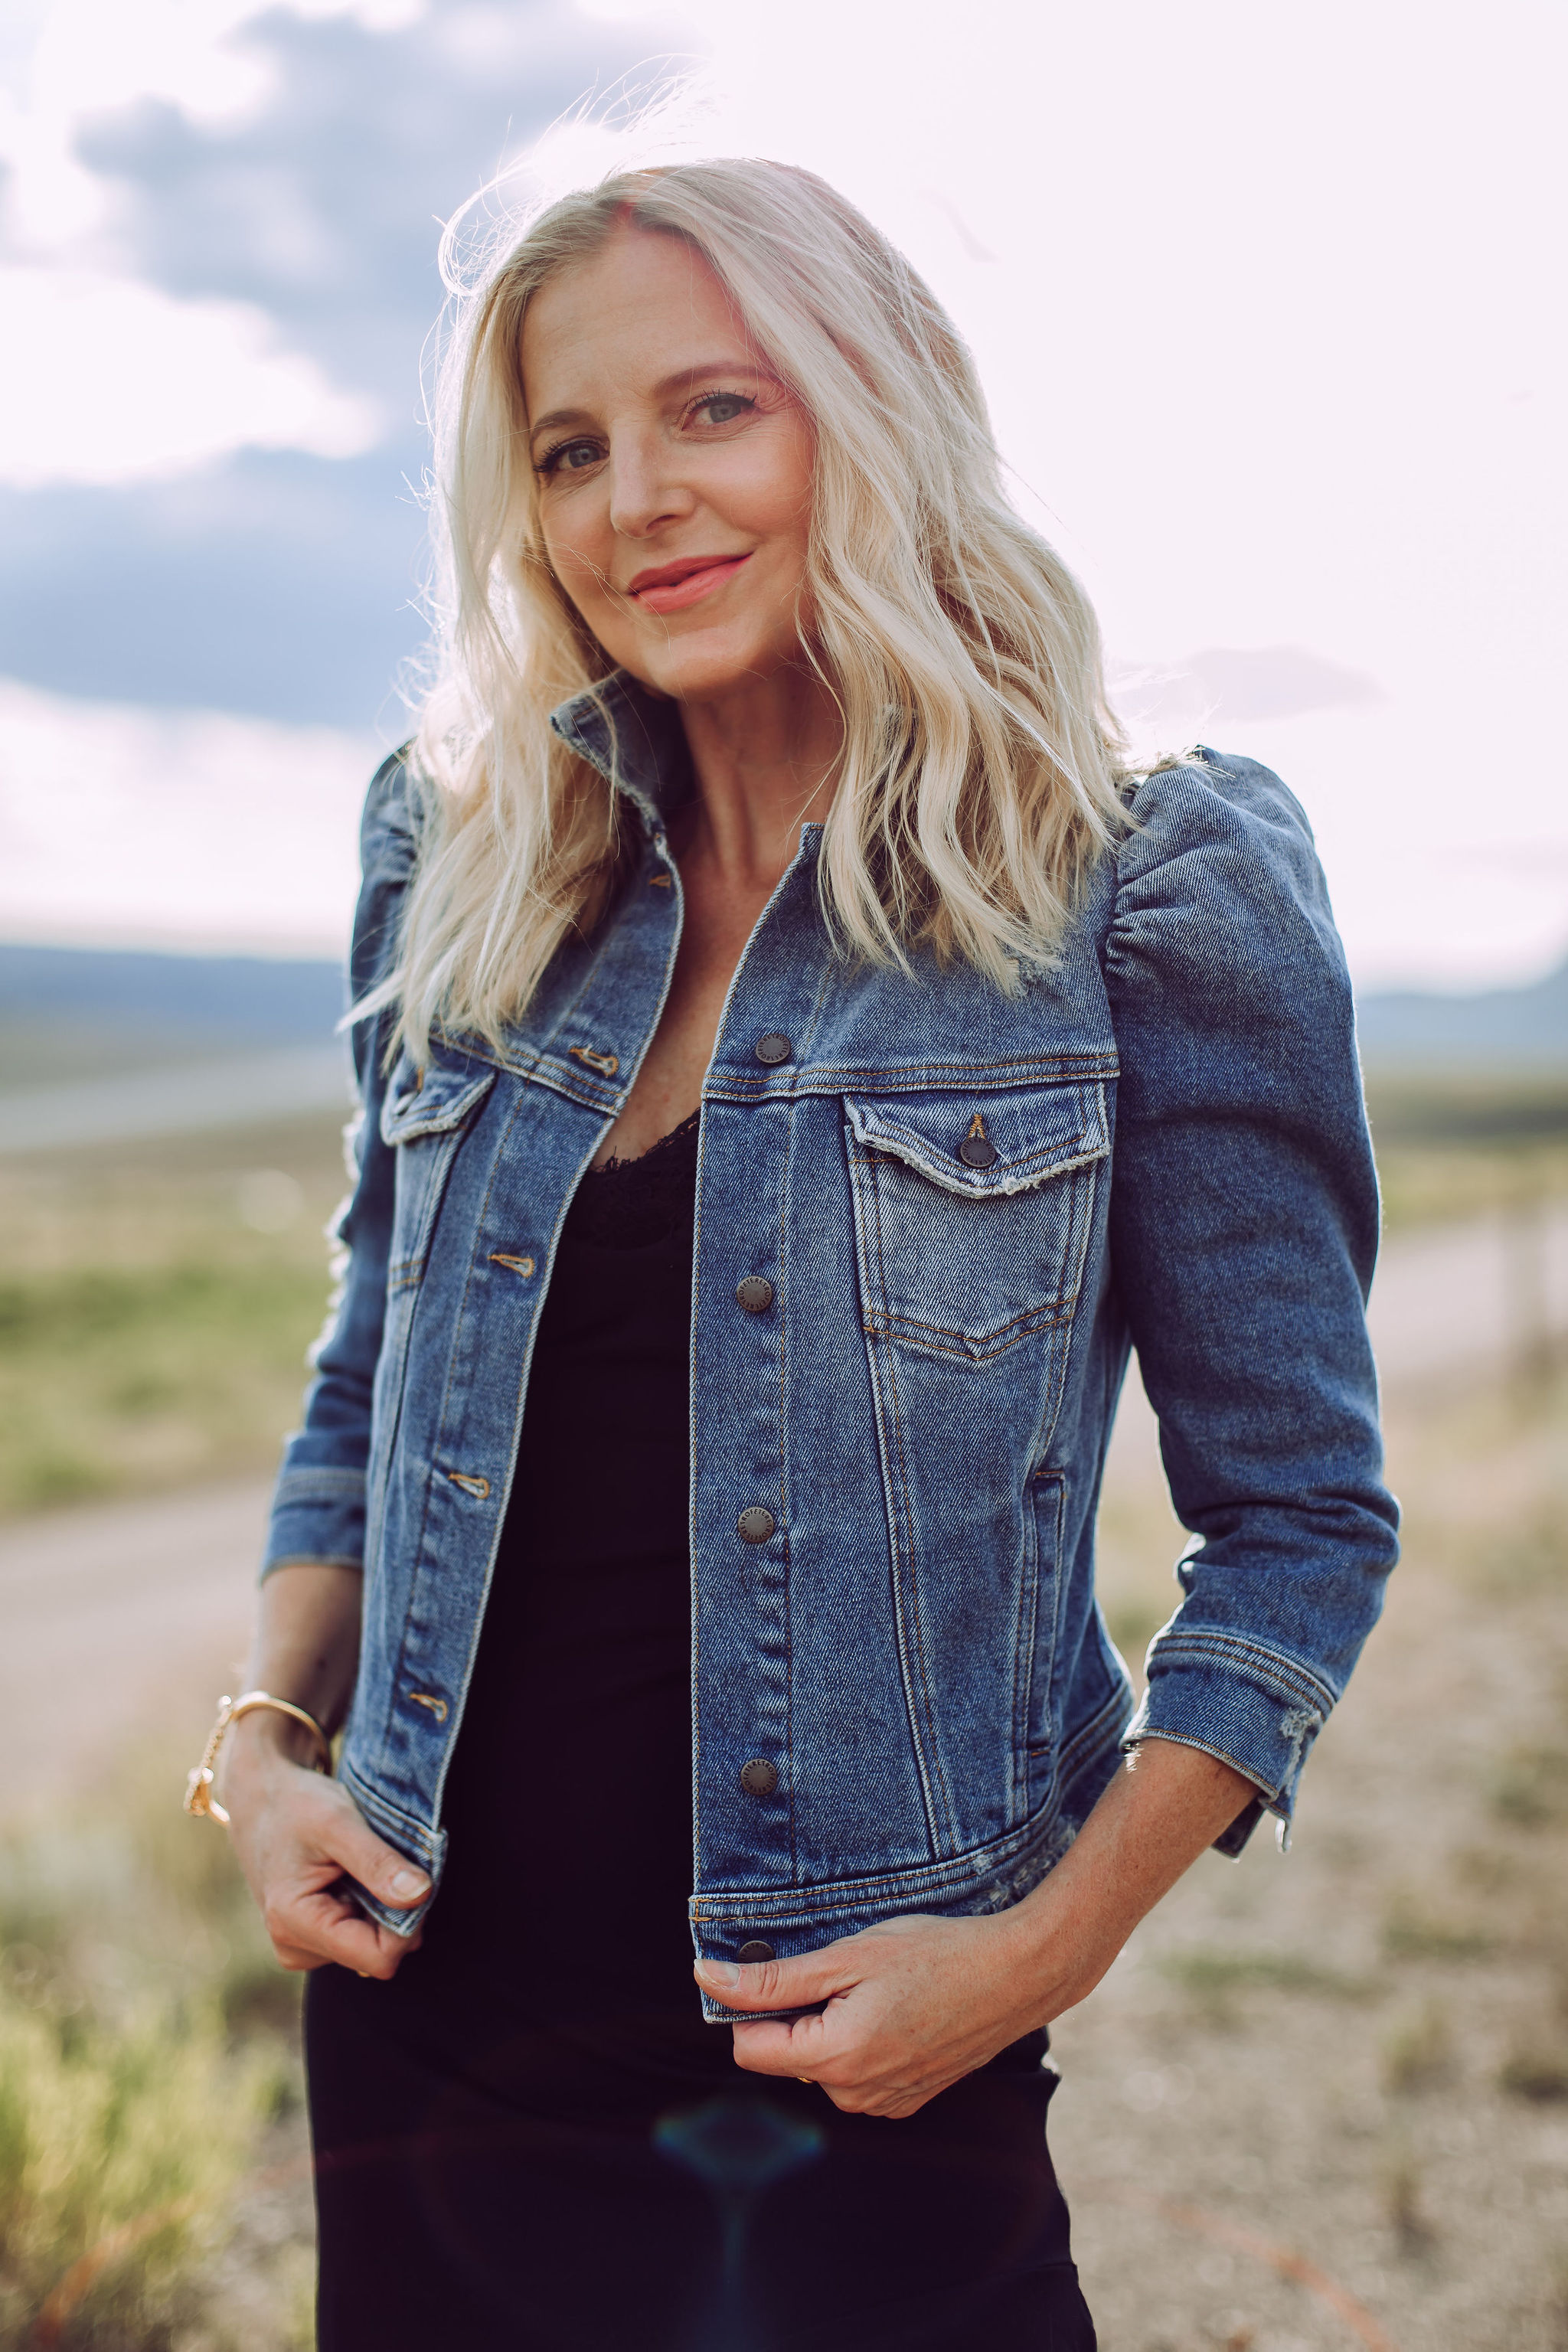 Day To Date Night Outfits, Fashion blogger Erin Busbee of Busbee Style wearing a black susana monaco dress with golden goose sneakers, retrofete denim puff sleeve jacket and aviator sunglasses in Telluride, Colorado